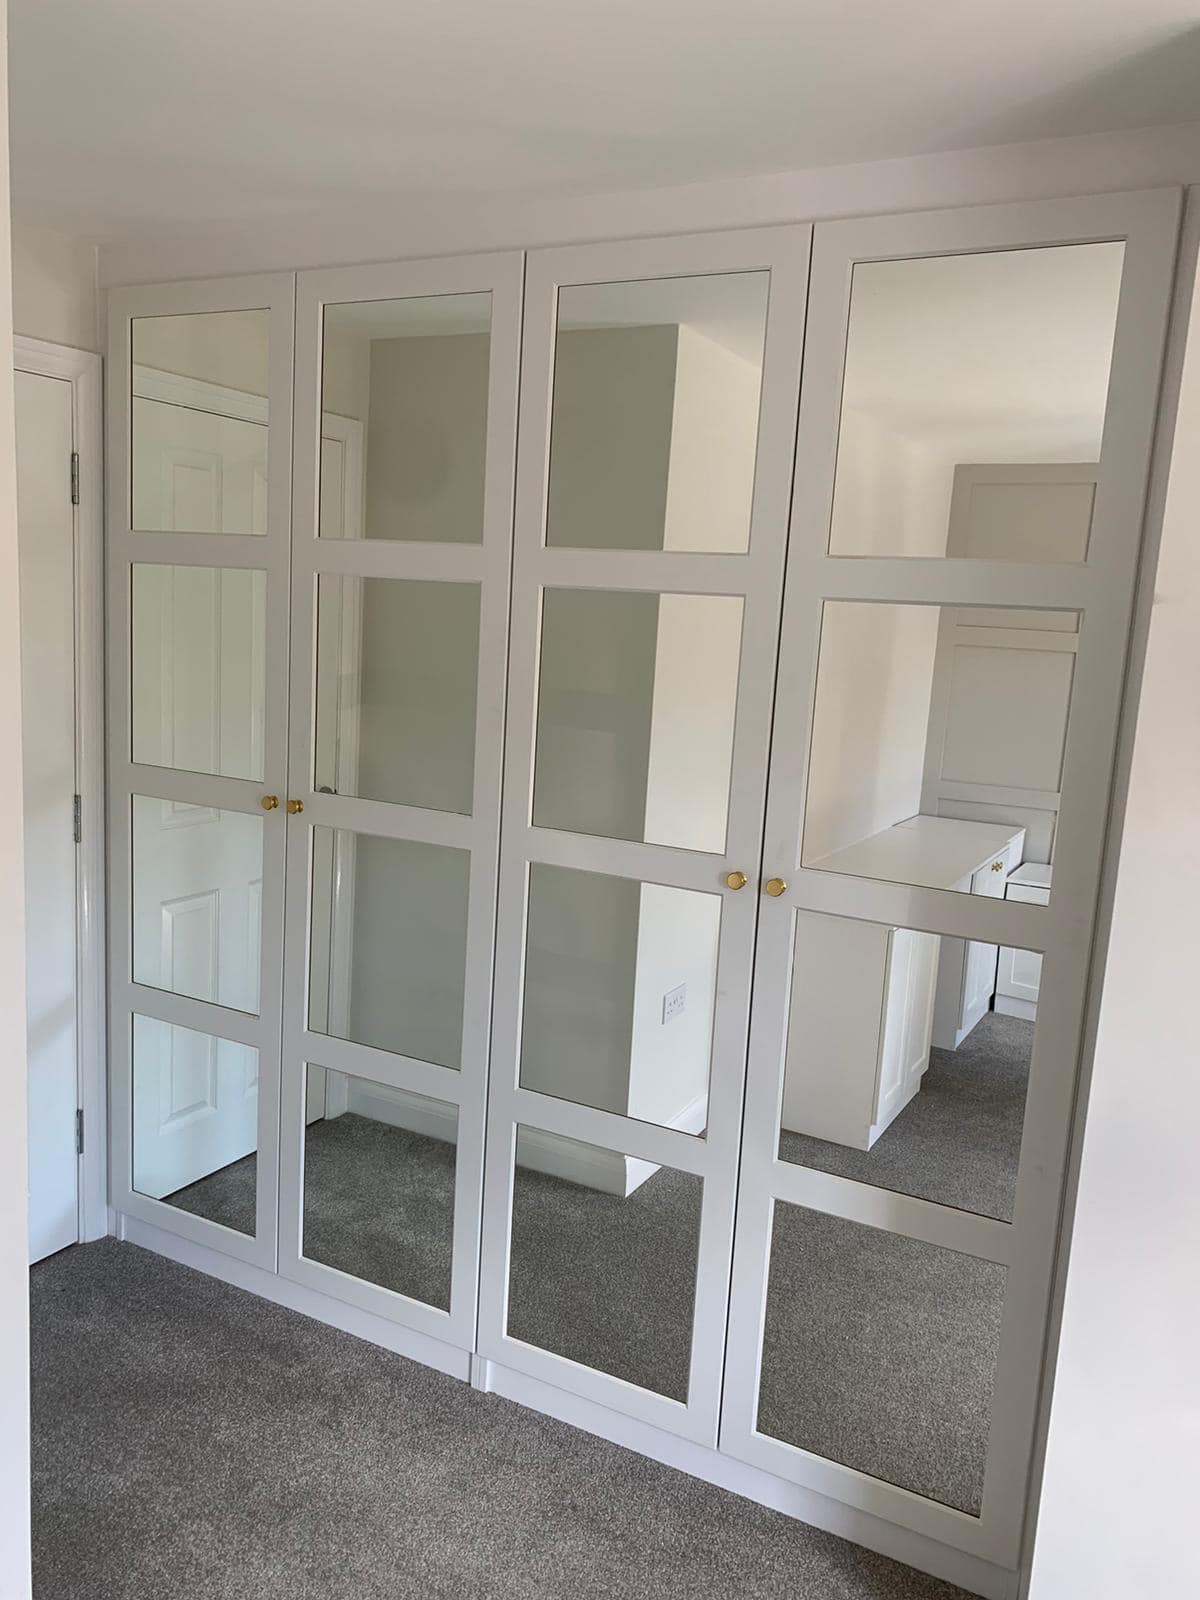 Fitted Wardrobes Mirrored Sliding, Mirrored Dressing Room Doors